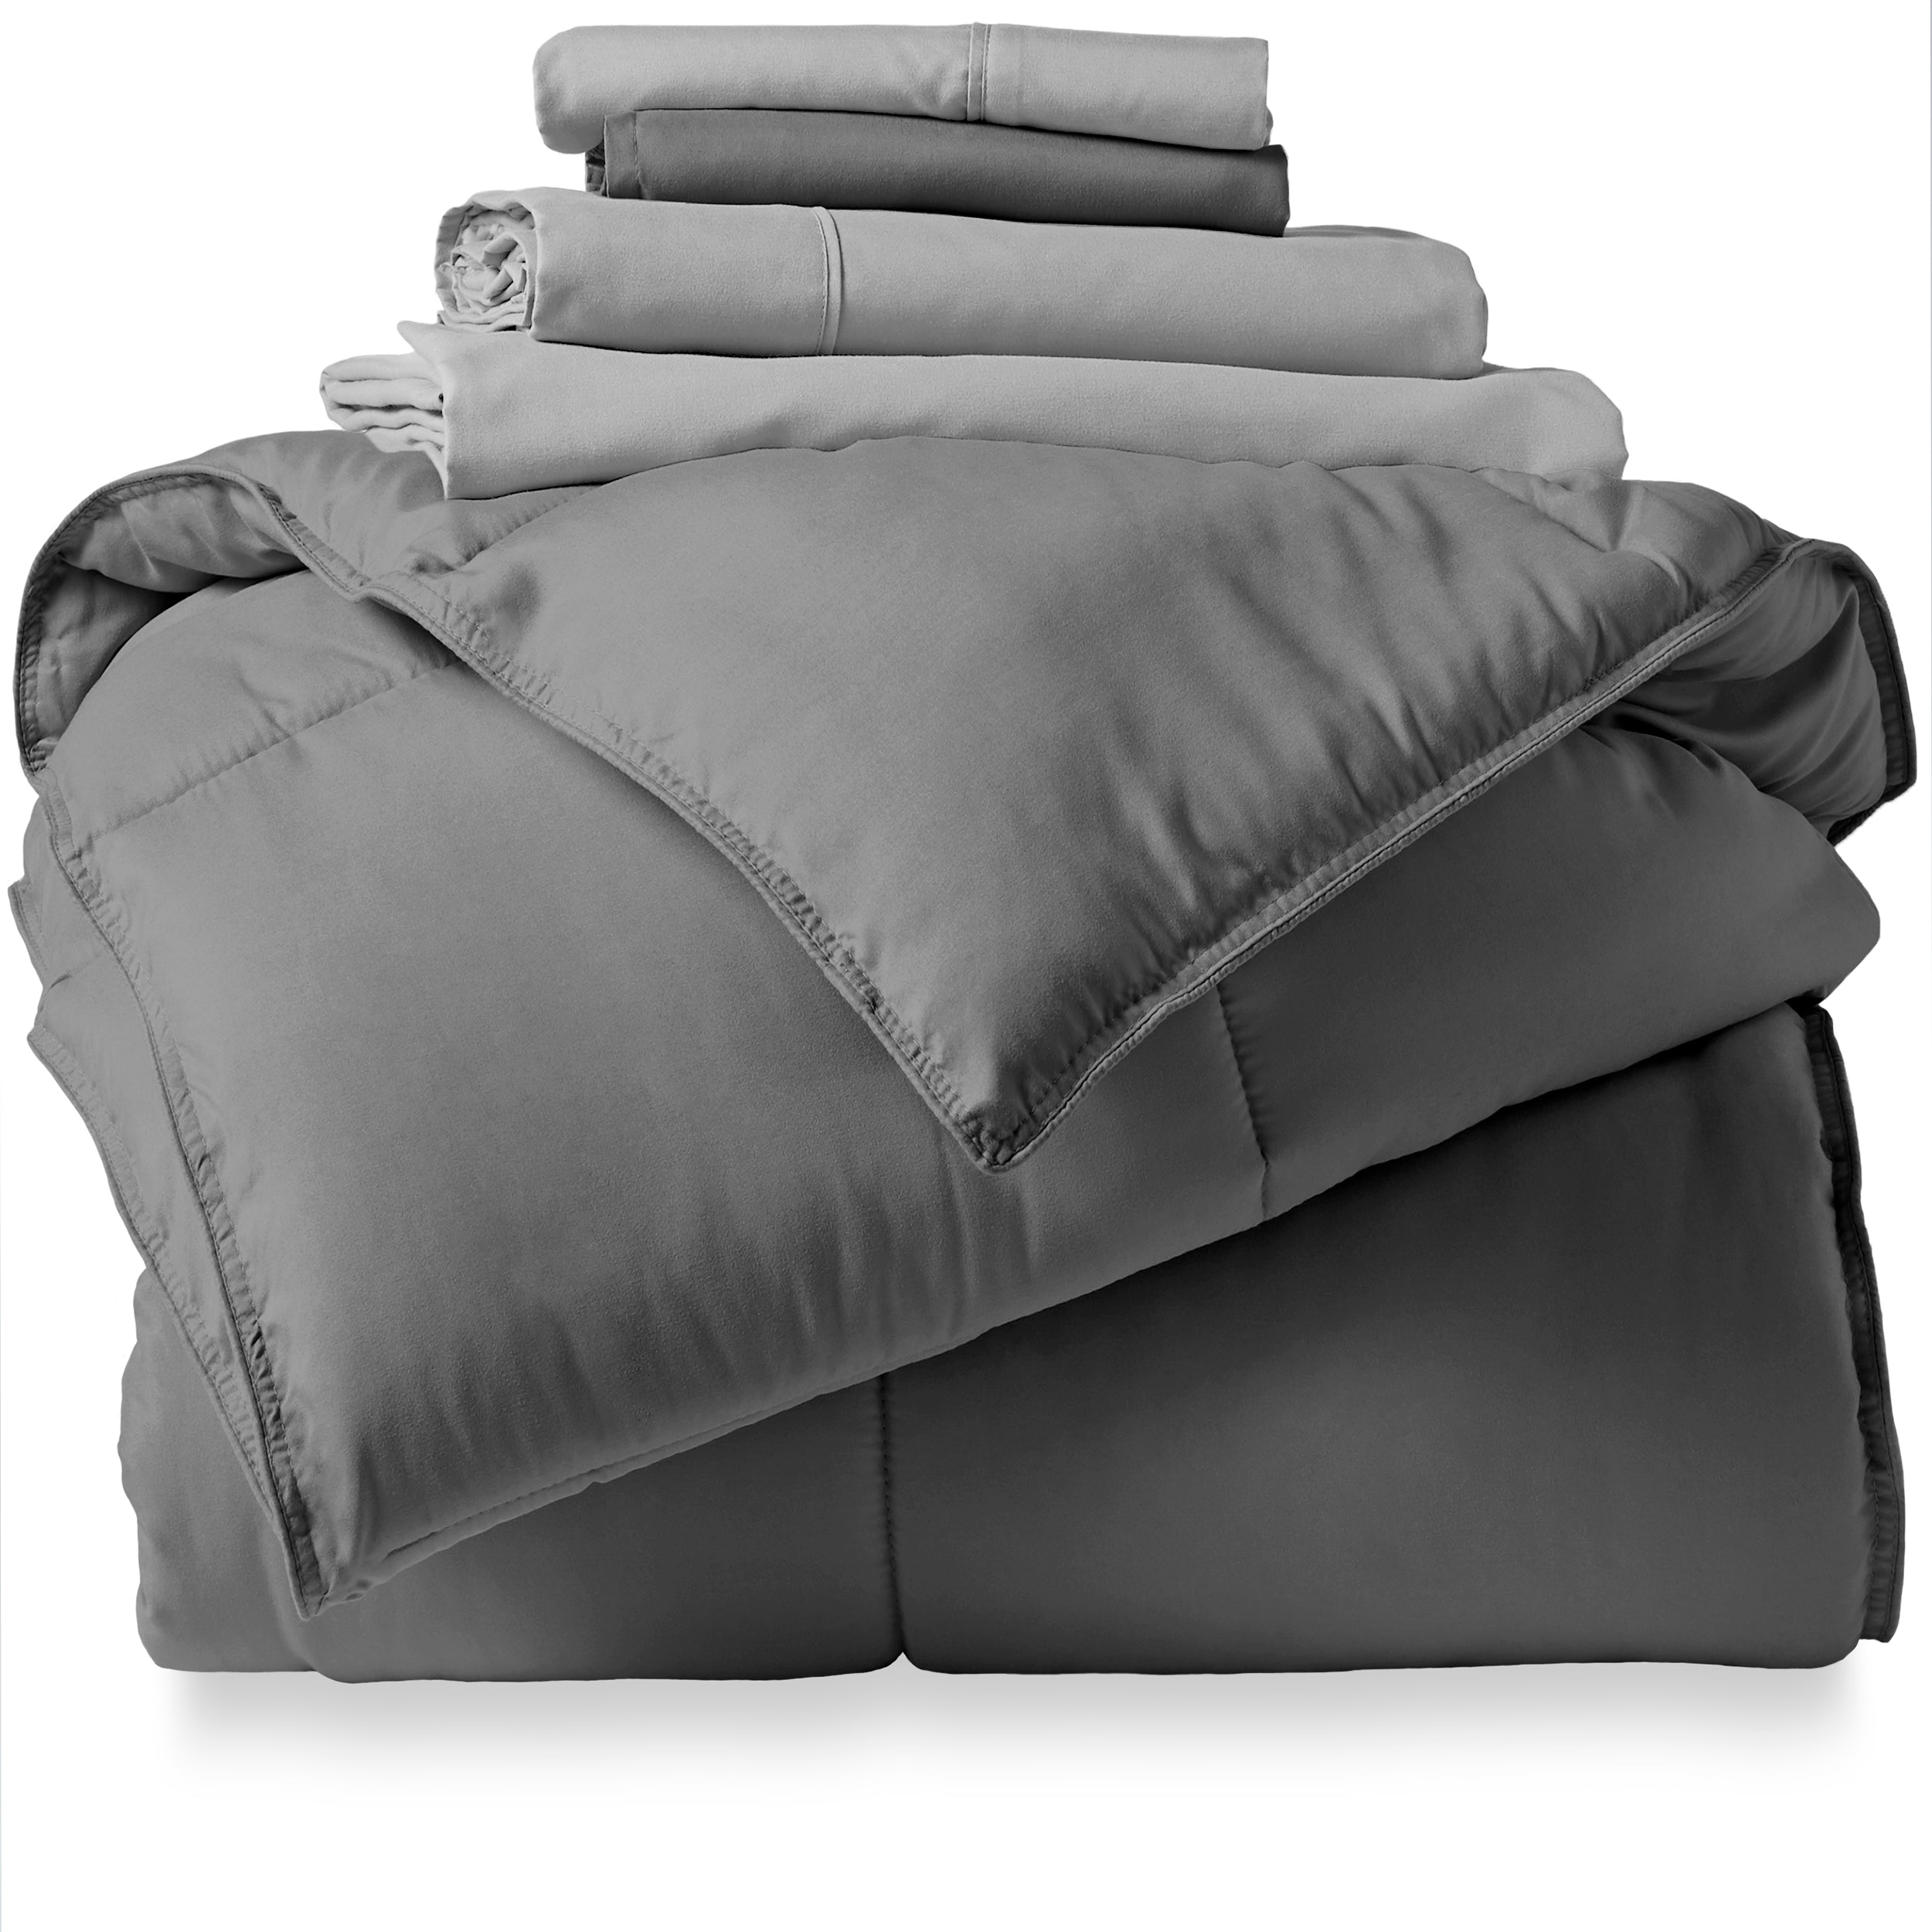 Twin Size Bed-in-a-Bag